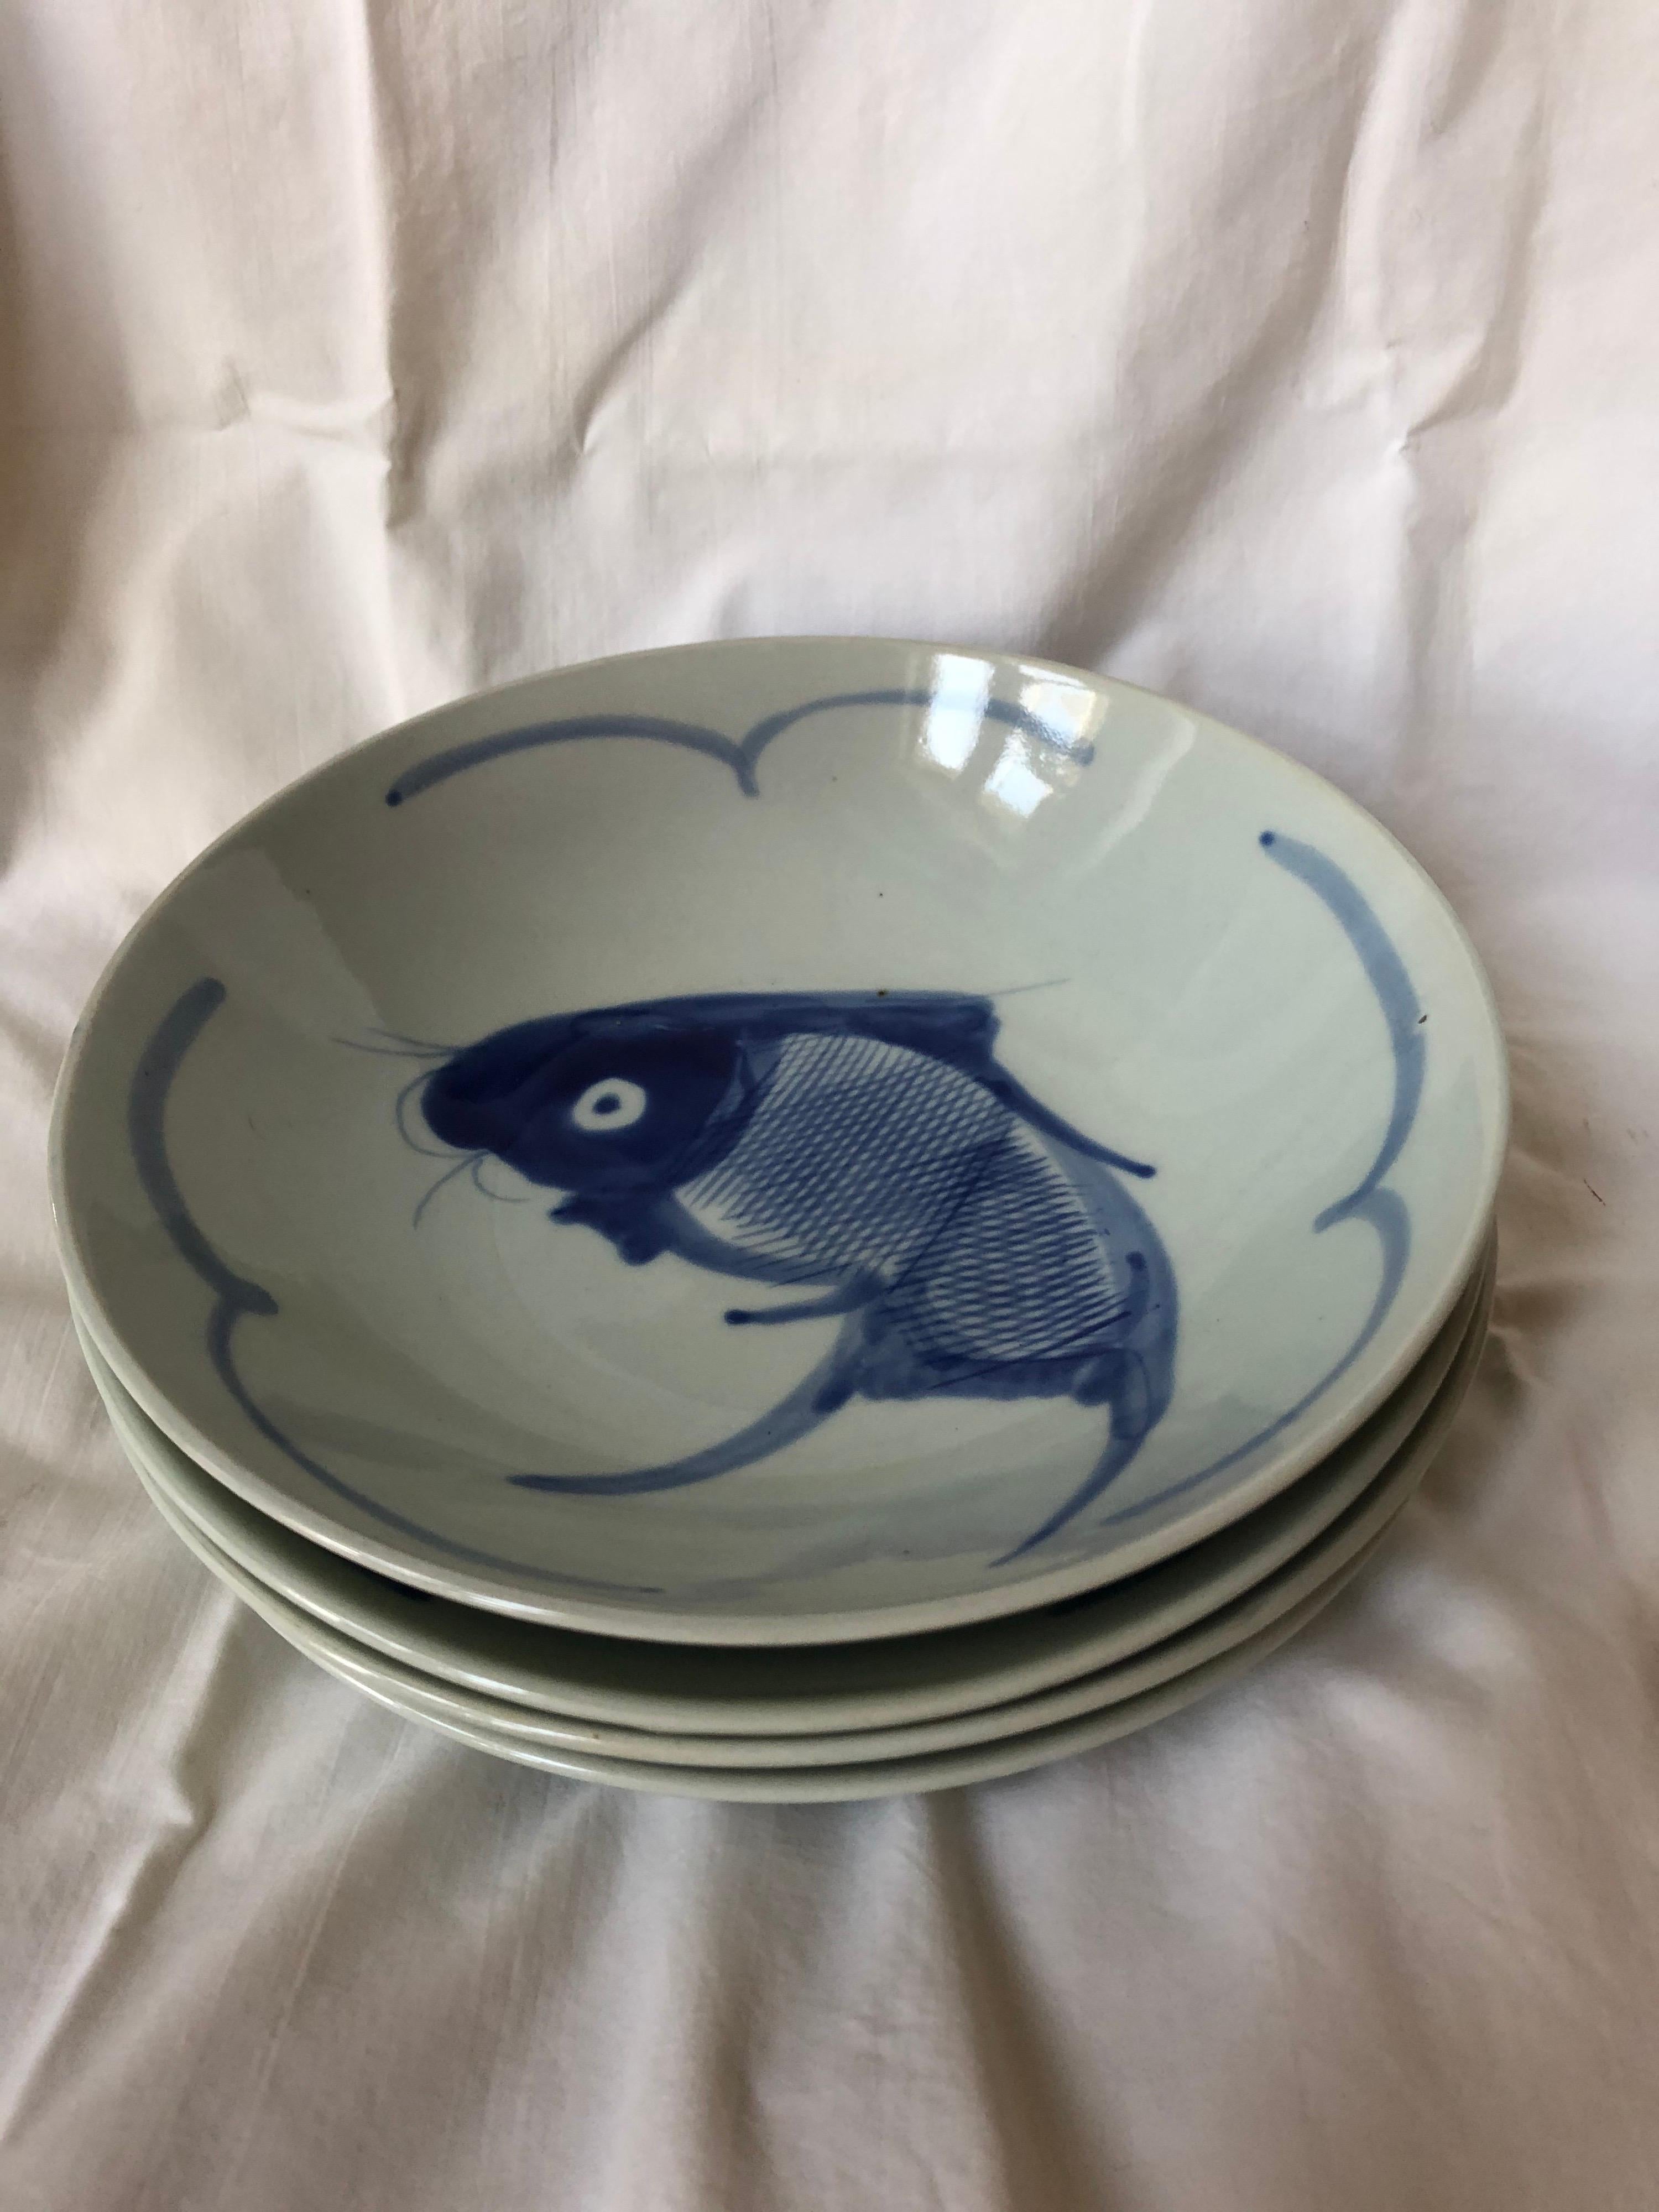 Wonderful set of four good sized pale blue Chinese vintage porcelain soup plates with cobalt blue decoration of koi or carp. Grew up loving these! Modern but ancient design.